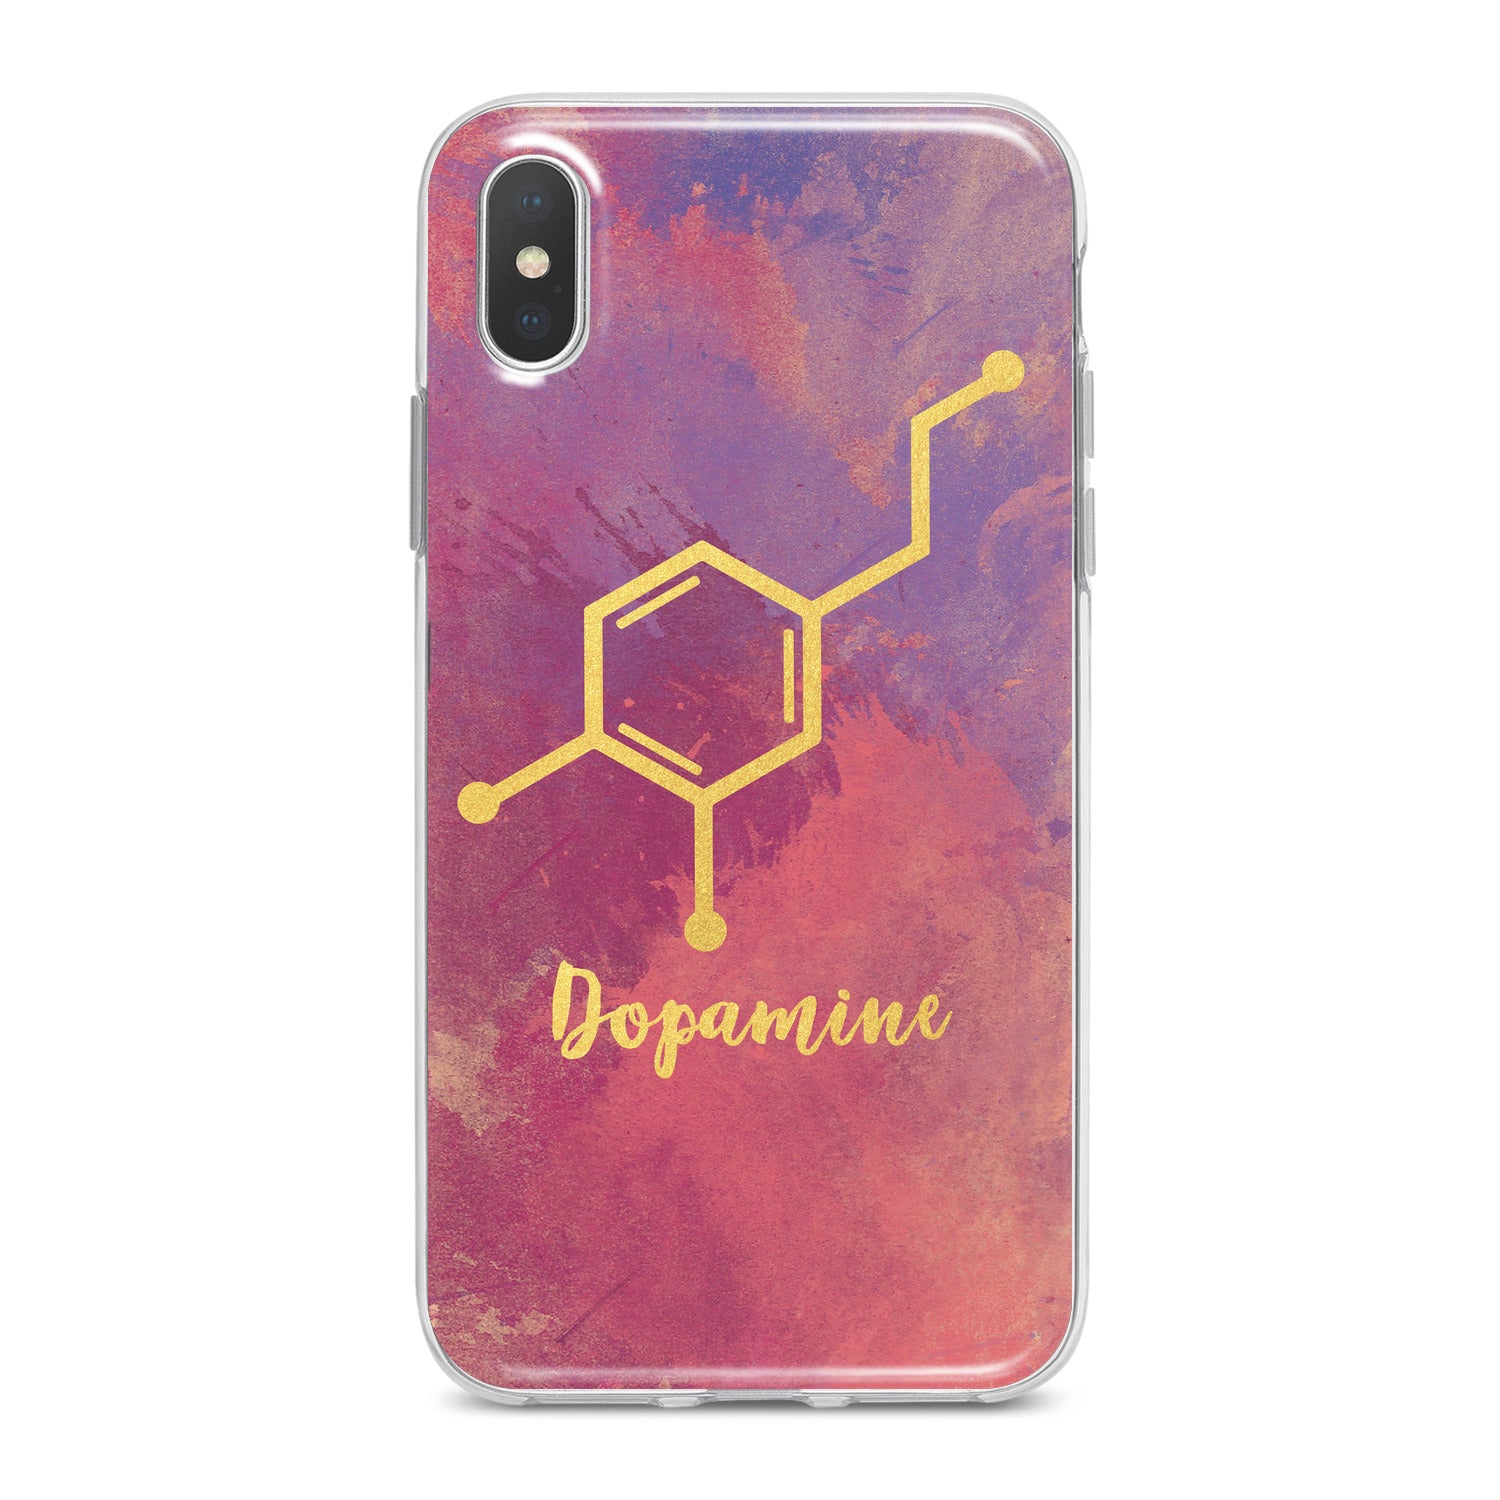 Lex Altern Dopamine Formula Phone Case for your iPhone & Android phone.